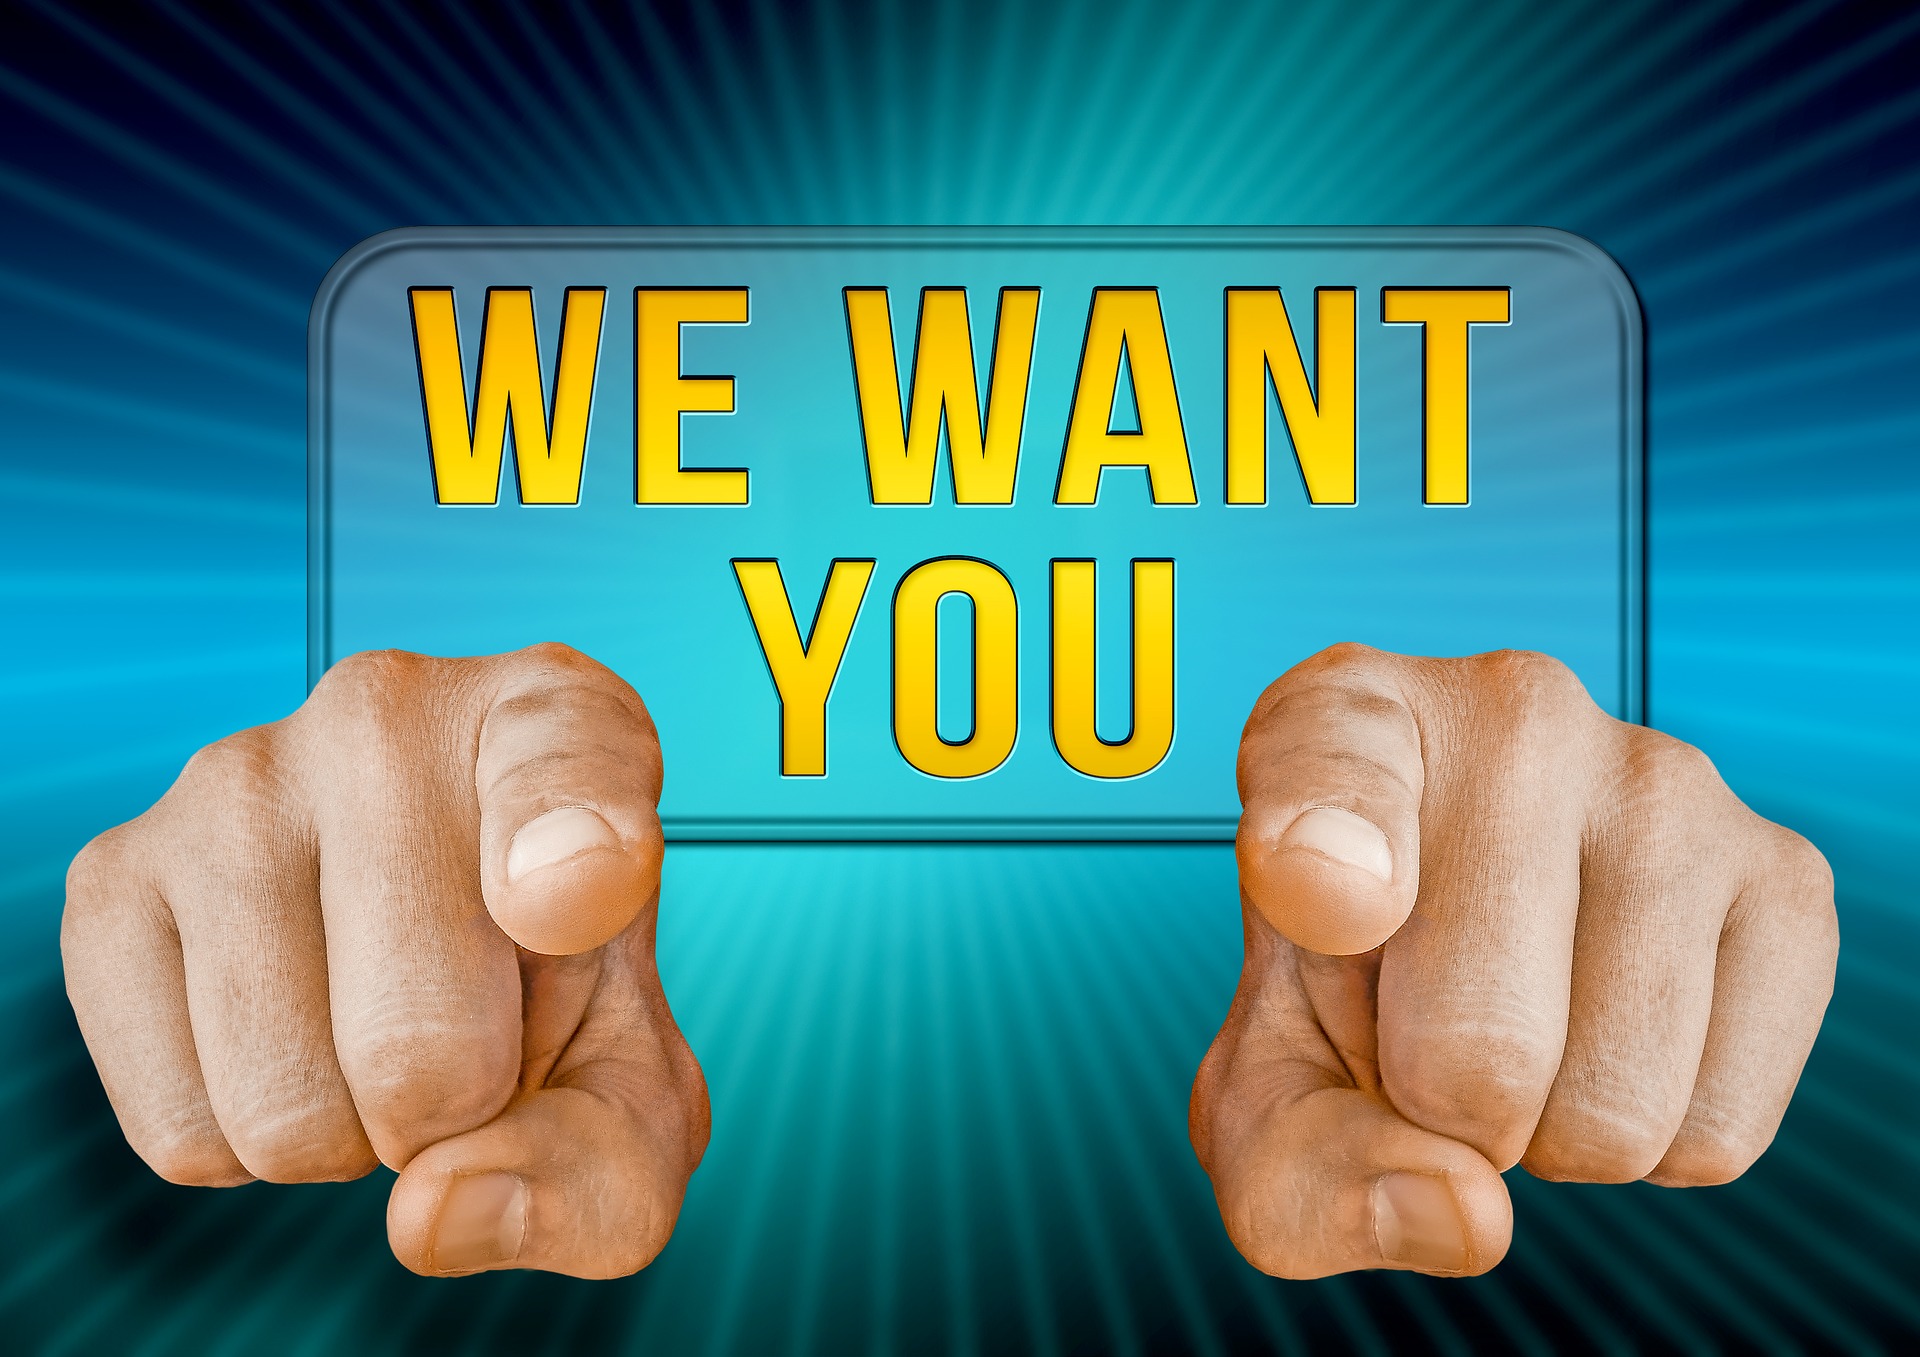 Job: We want you, two hands pointing towards viewer